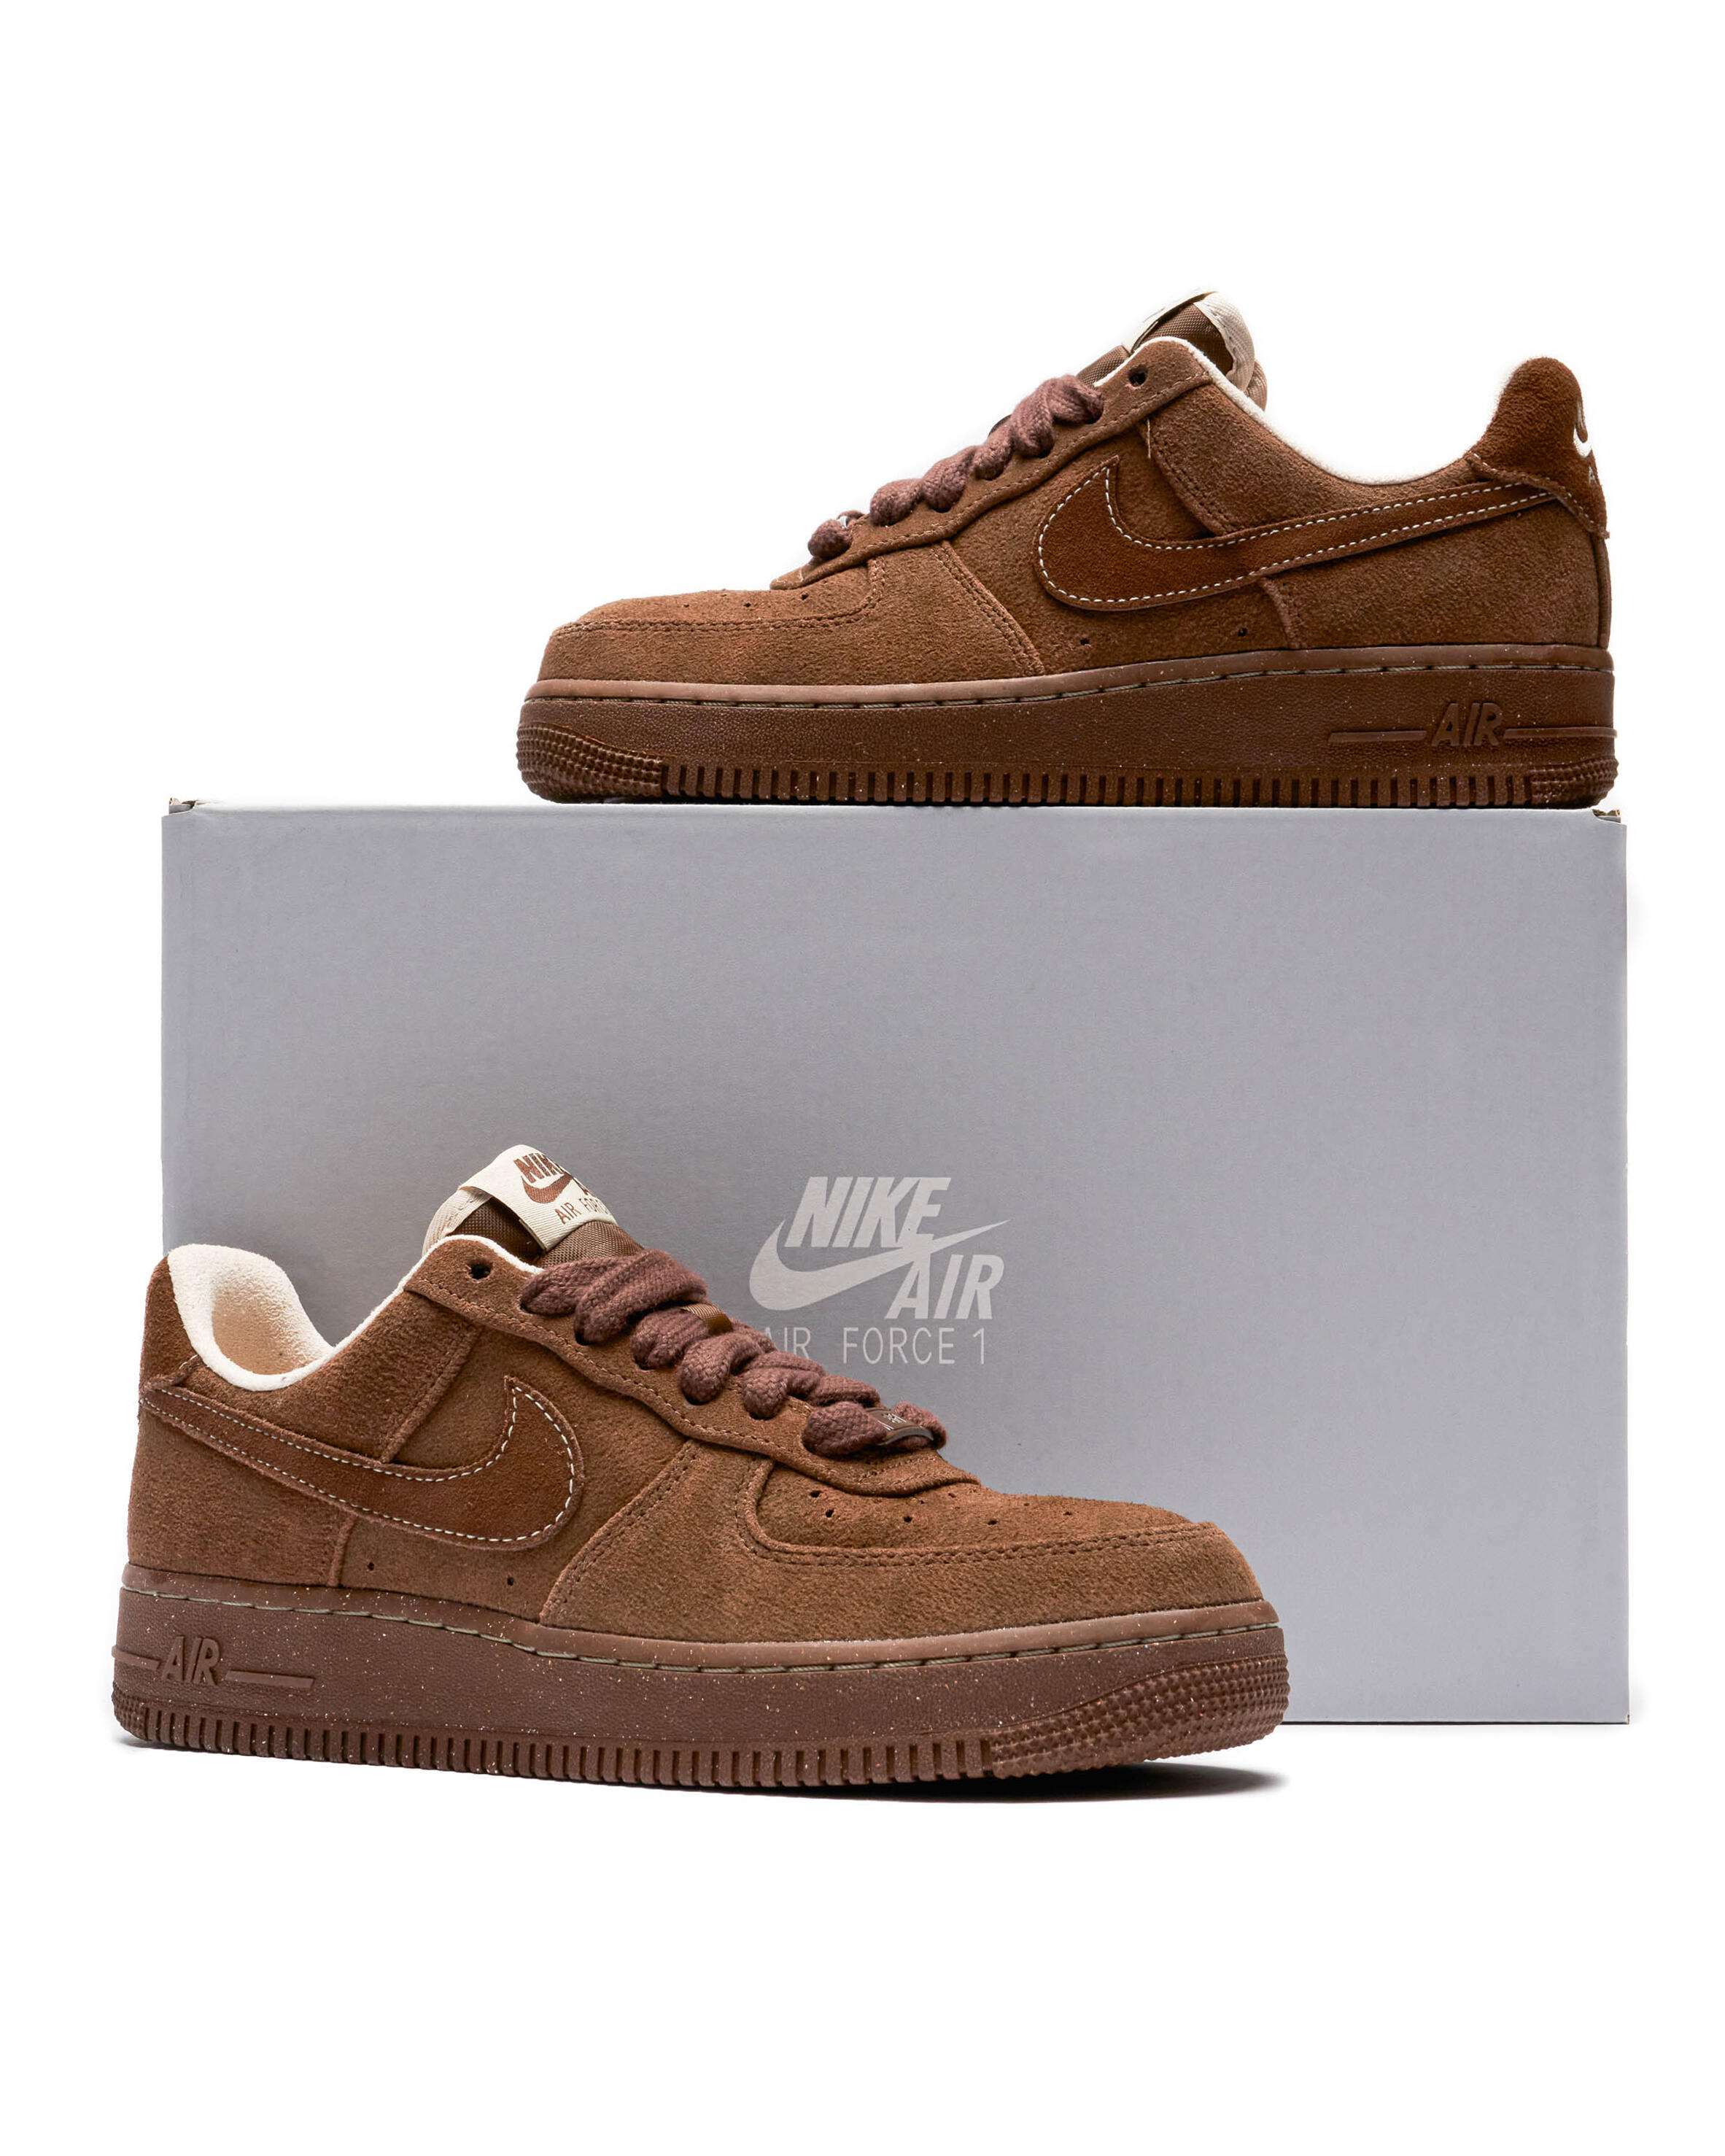 Nike WMNS AIR FORCE 1 '07